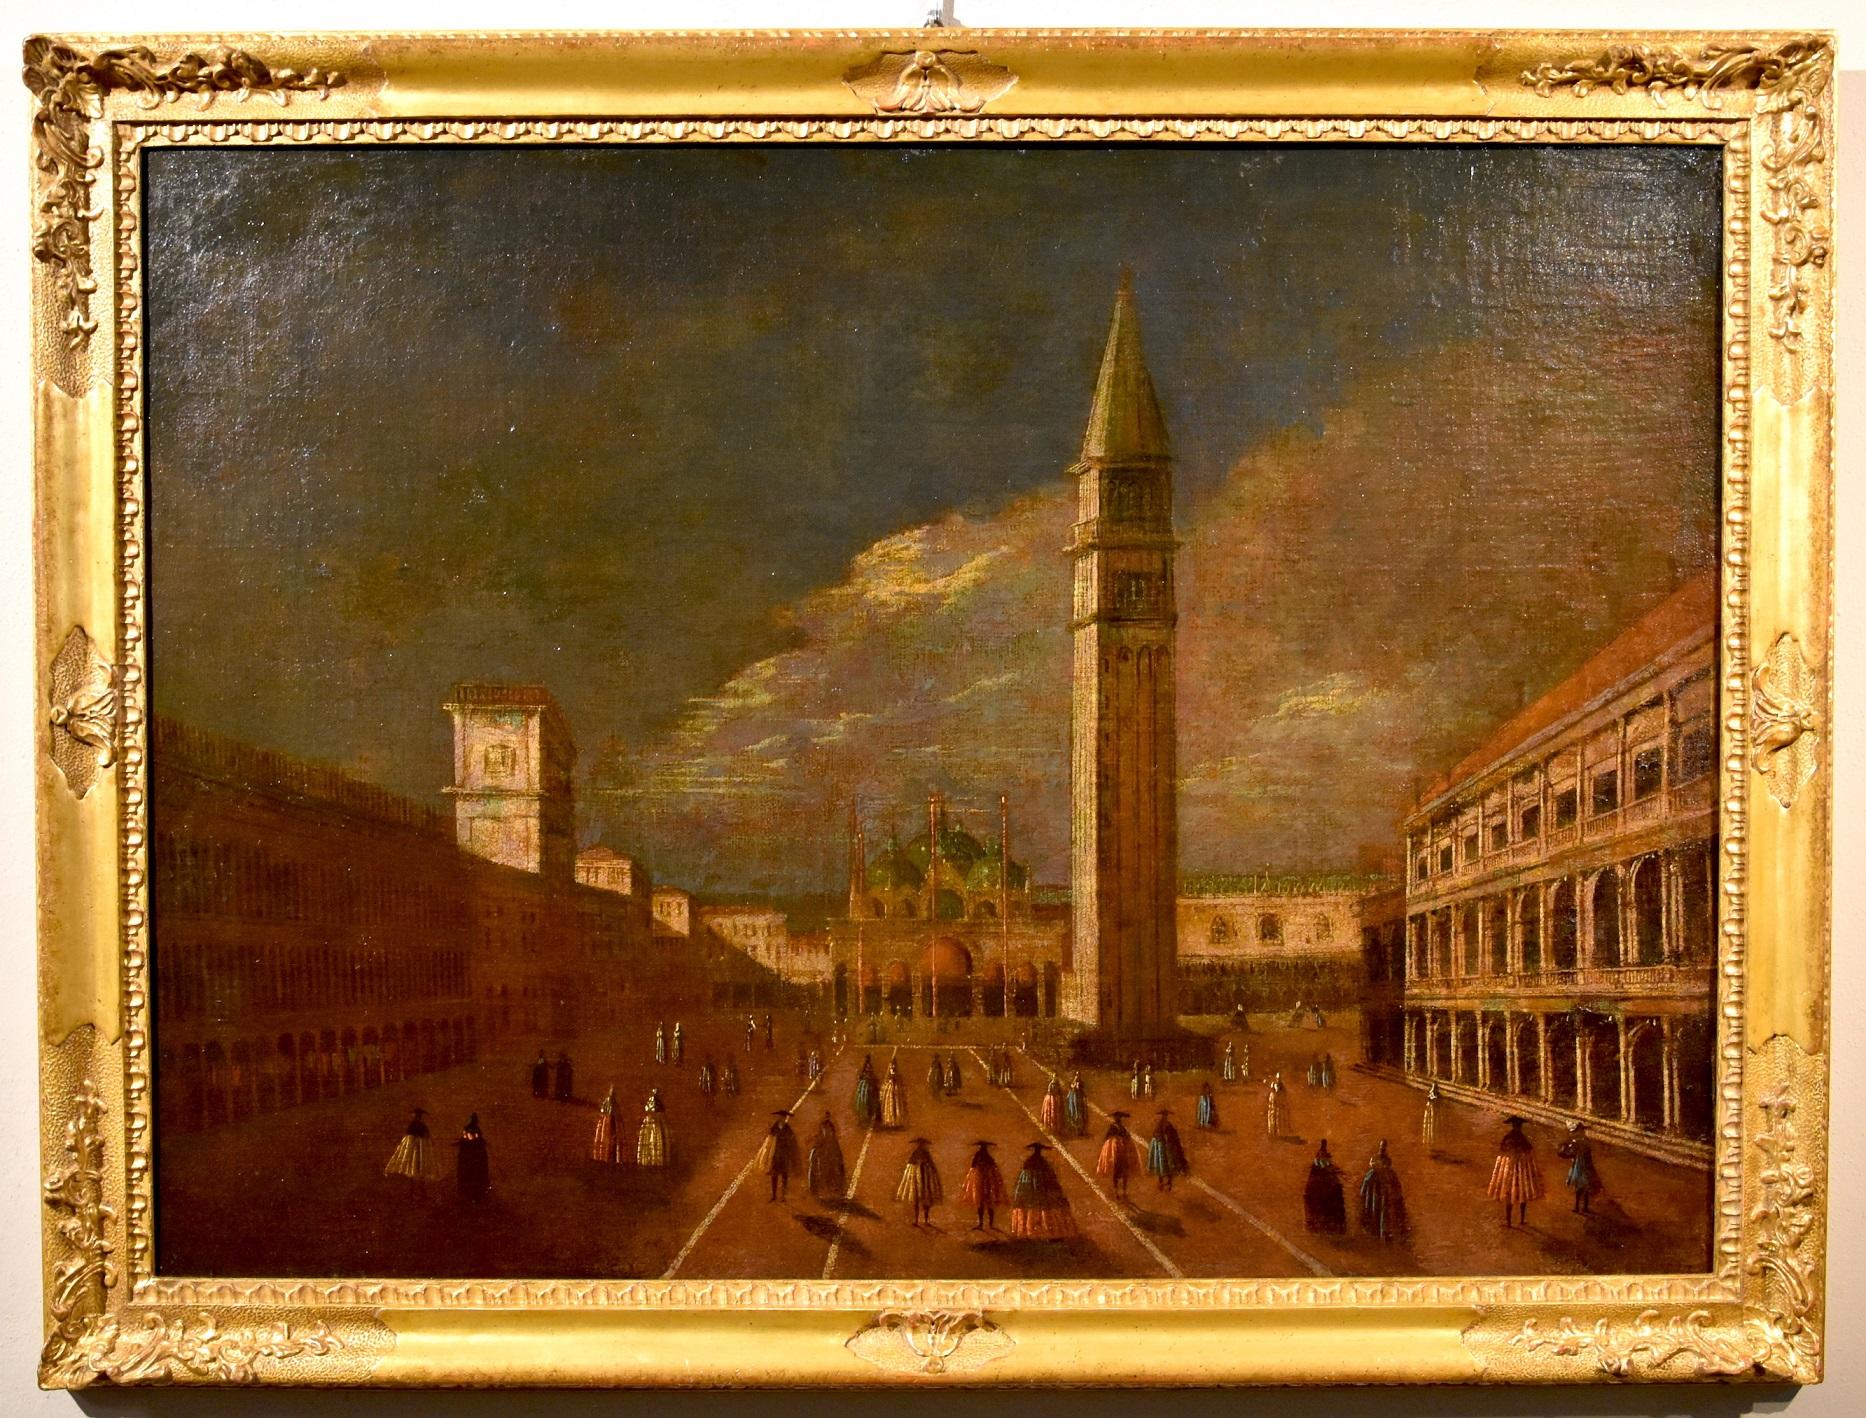 Venice San Marco Tironi Paint Oil on canvas Old master 18th Century Landscape  - Painting by Francesco Tironi (Venice, about 1745 - 1797),